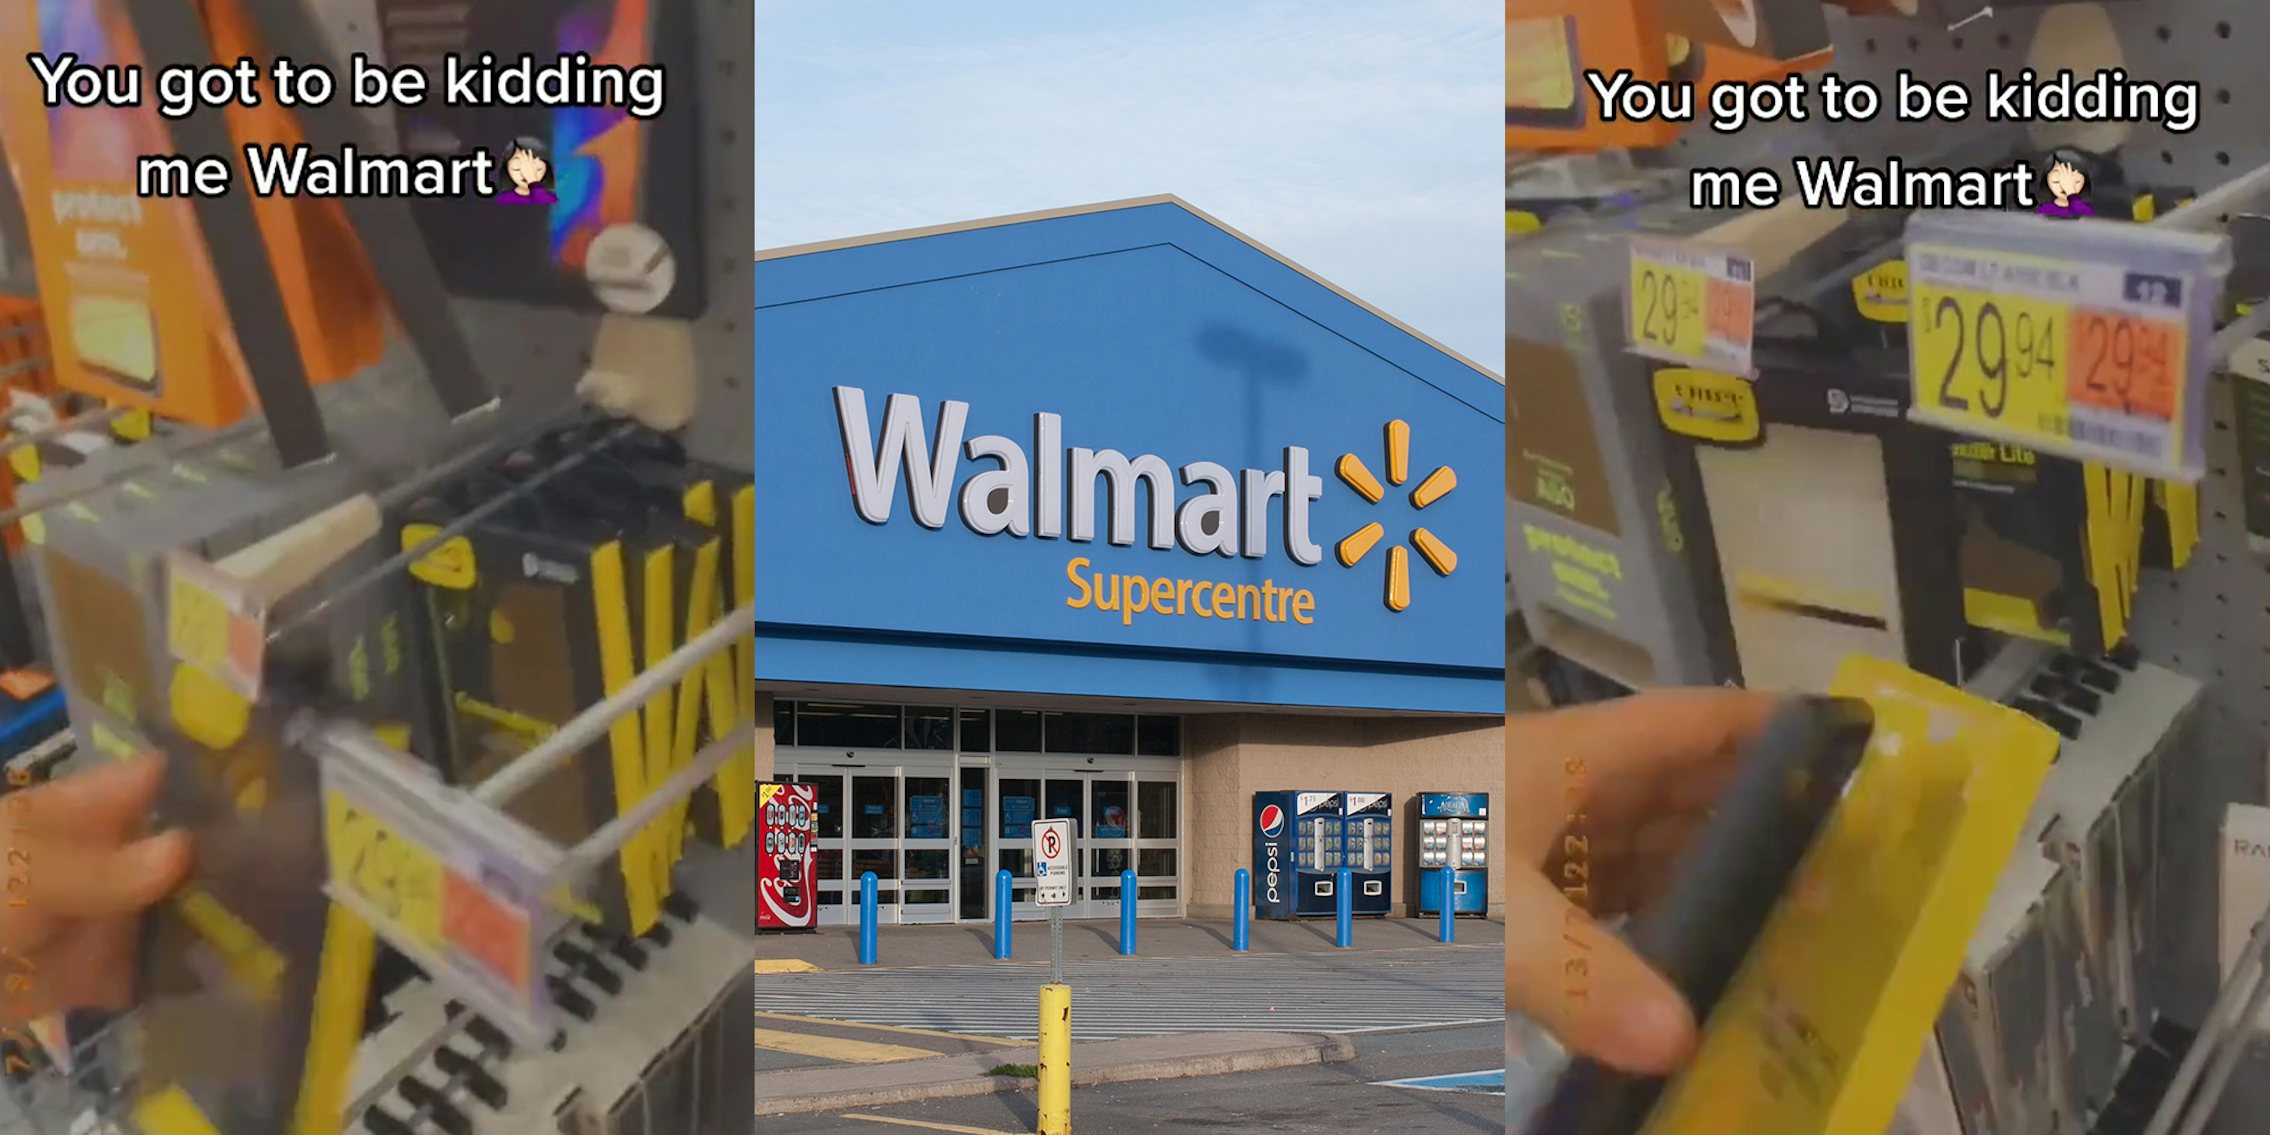 Walmart shopper shows nonsensical security lock on phone cases